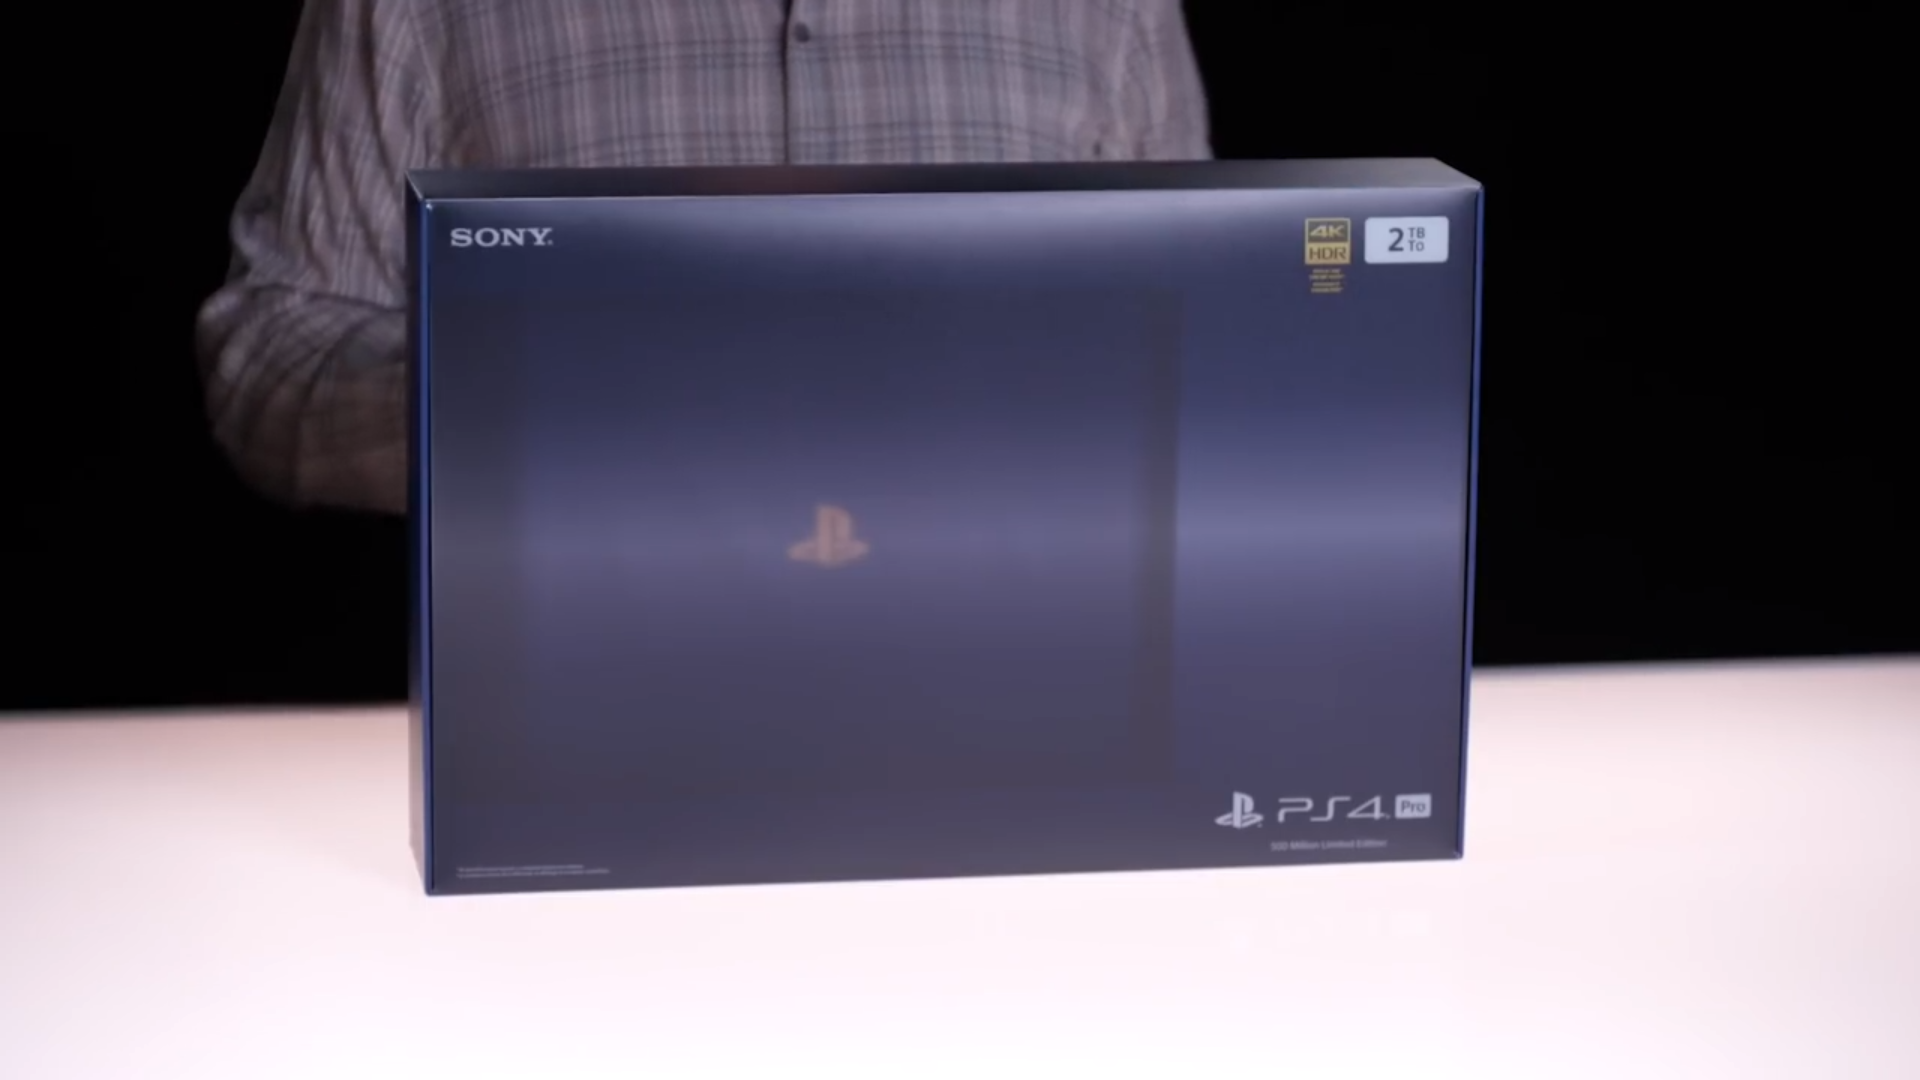 500 Million Limited Edition PS4 Pro detailed in close-up unboxing photos -  Polygon